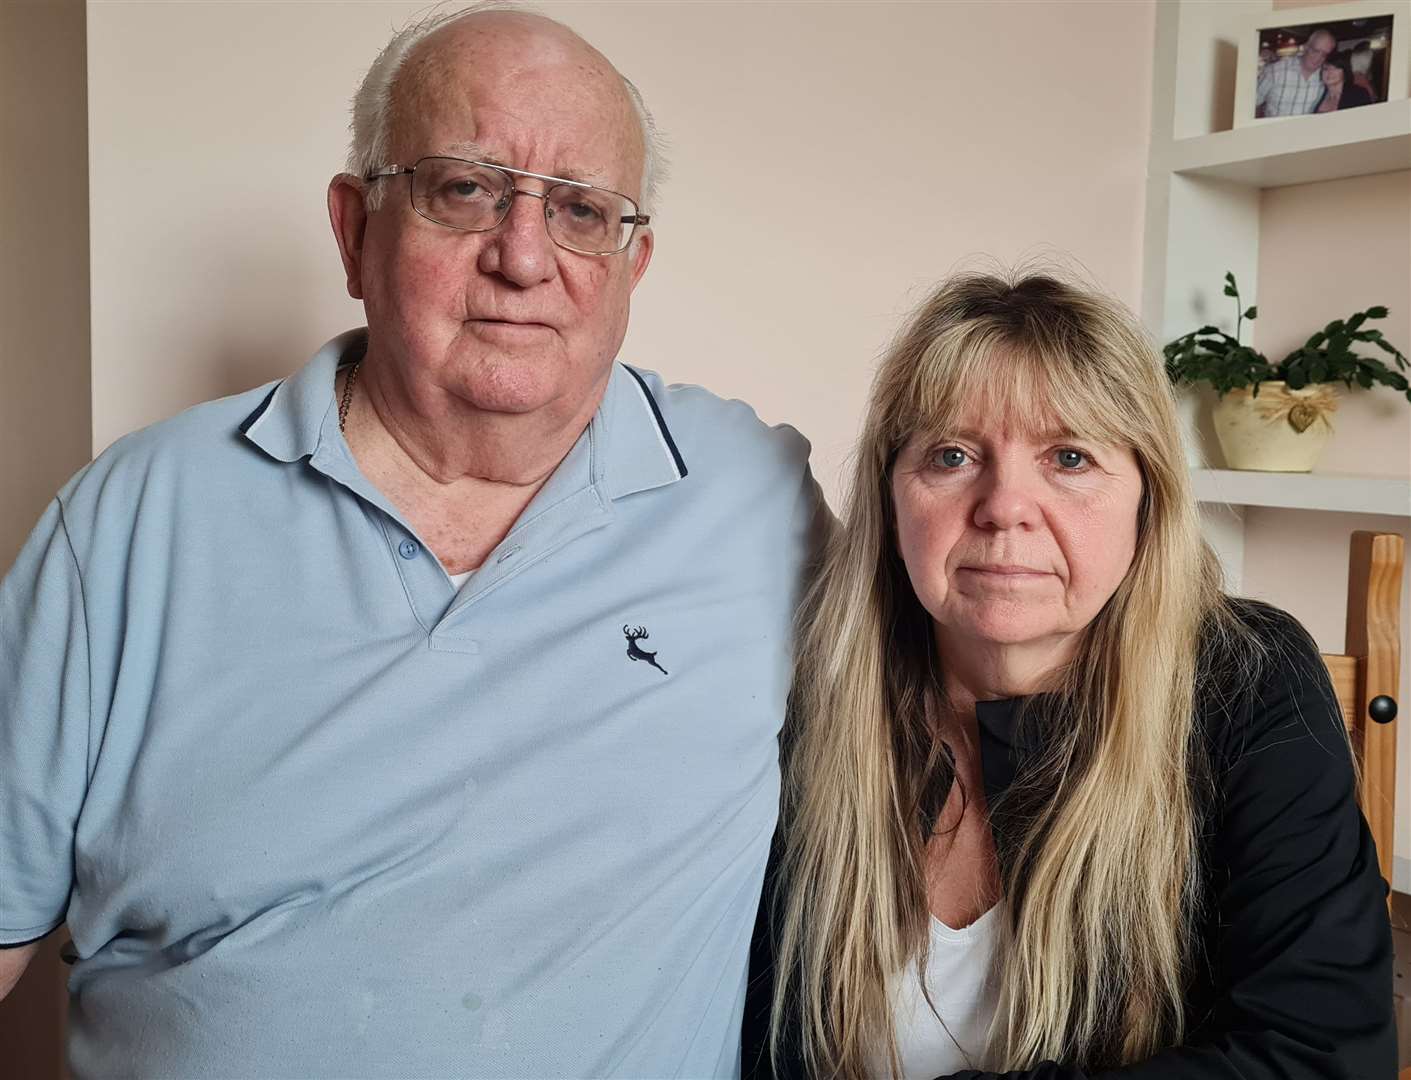 Former Lesters landlord Barry Holmes, 78, says the Margate pub “was never the same” for him and his wife Sue after the “horrific” attack